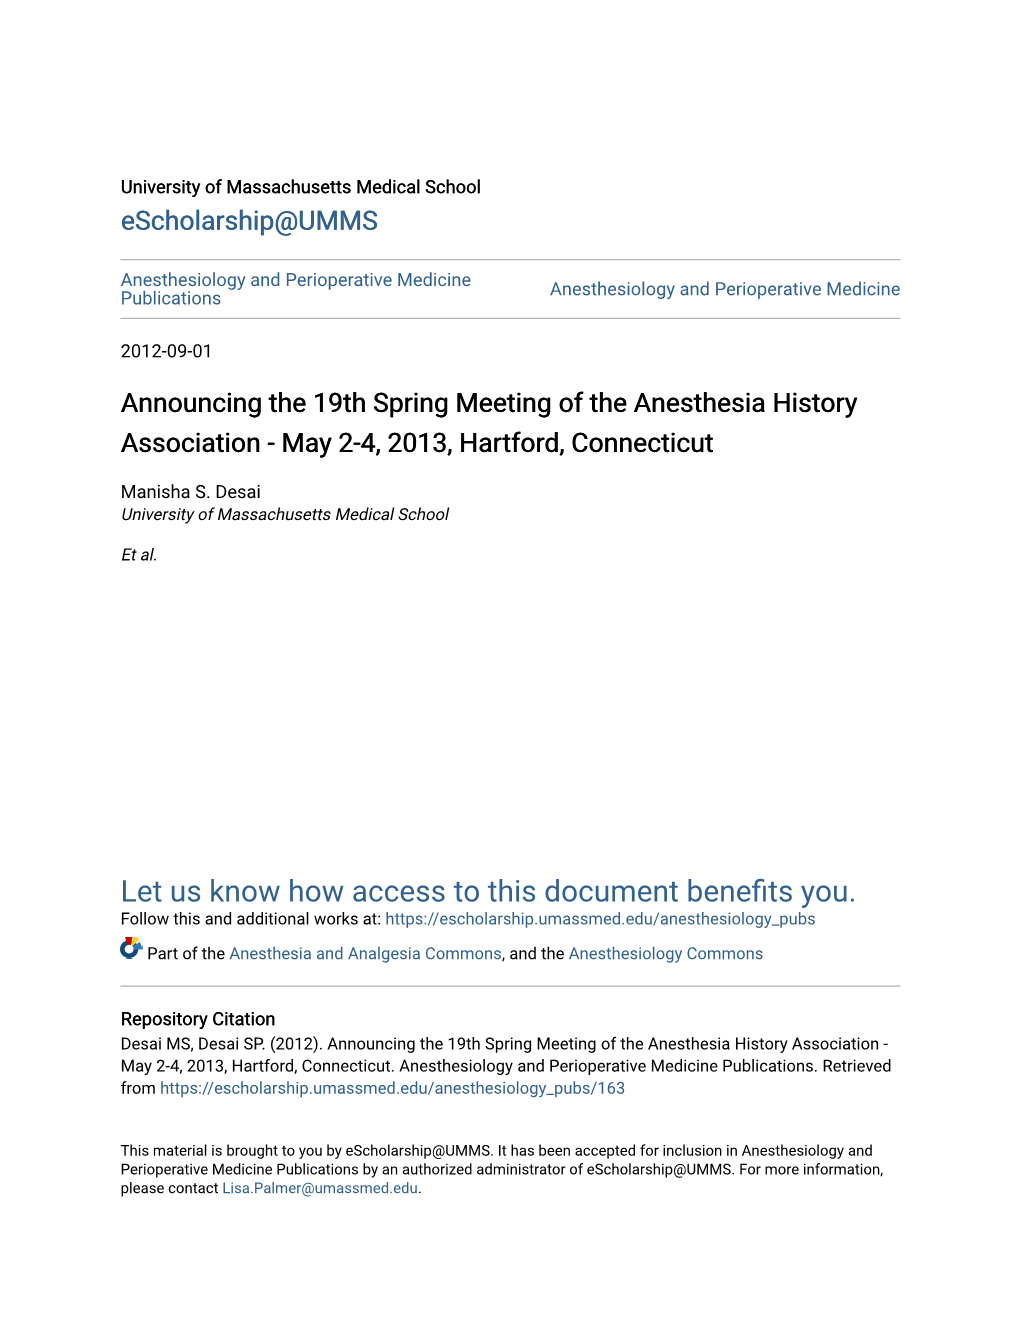 Announcing the 19Th Spring Meeting of the Anesthesia History Association - May 2-4, 2013, Hartford, Connecticut